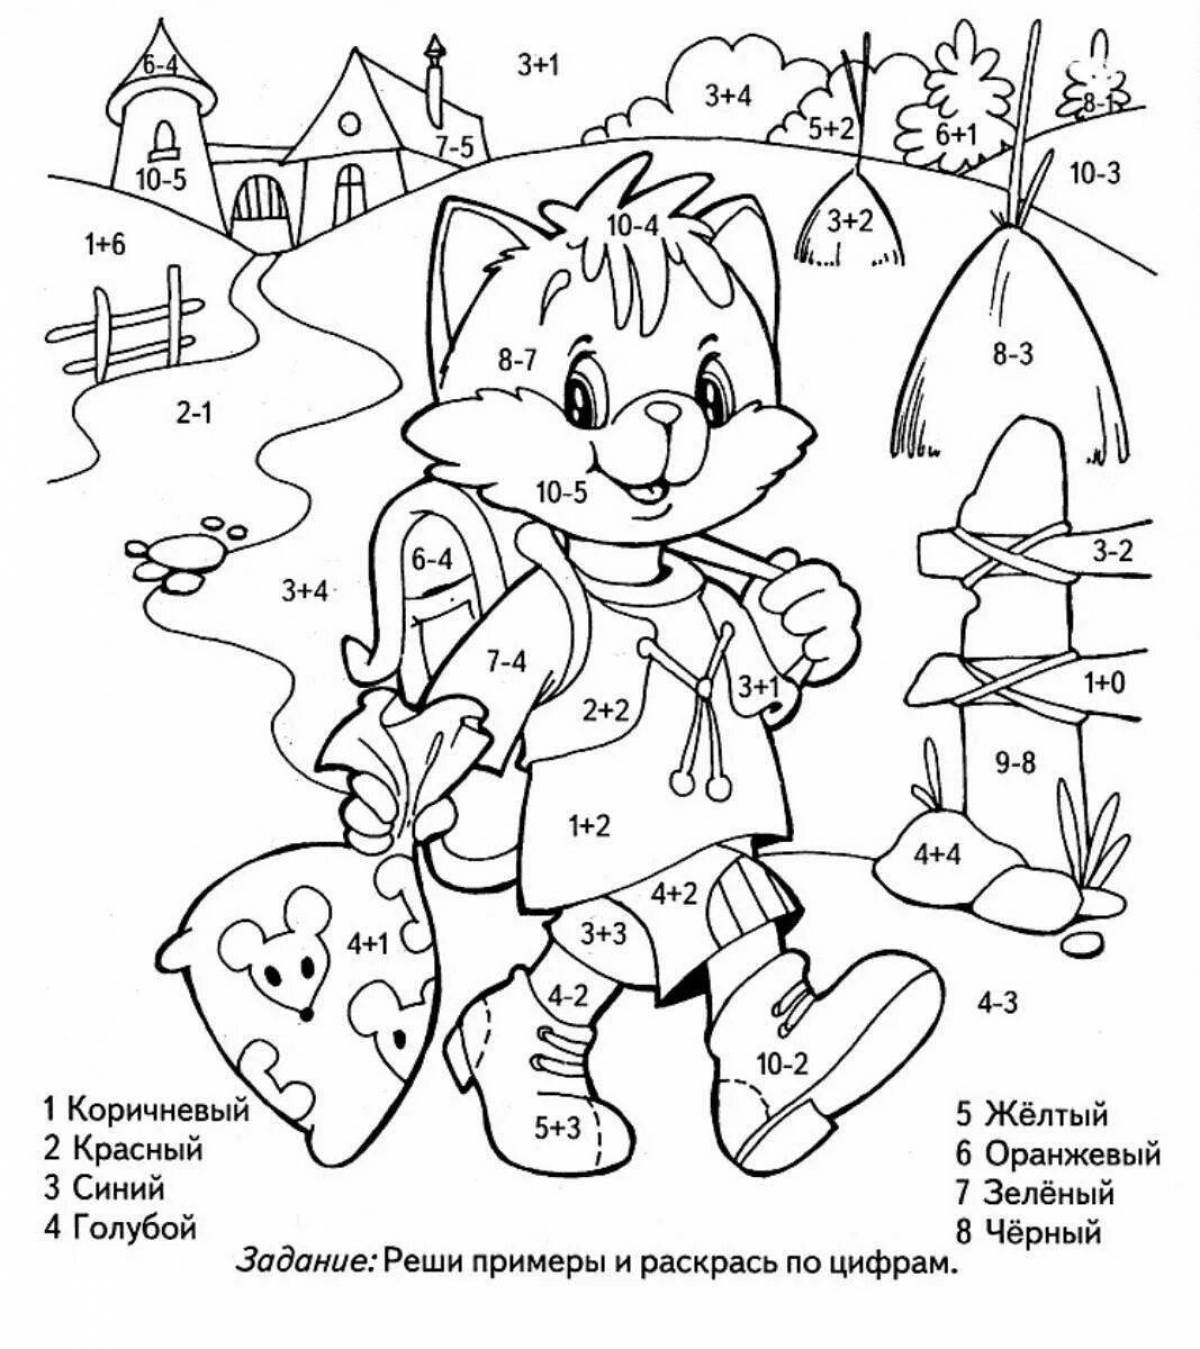 Coloring book for 3rd grade students